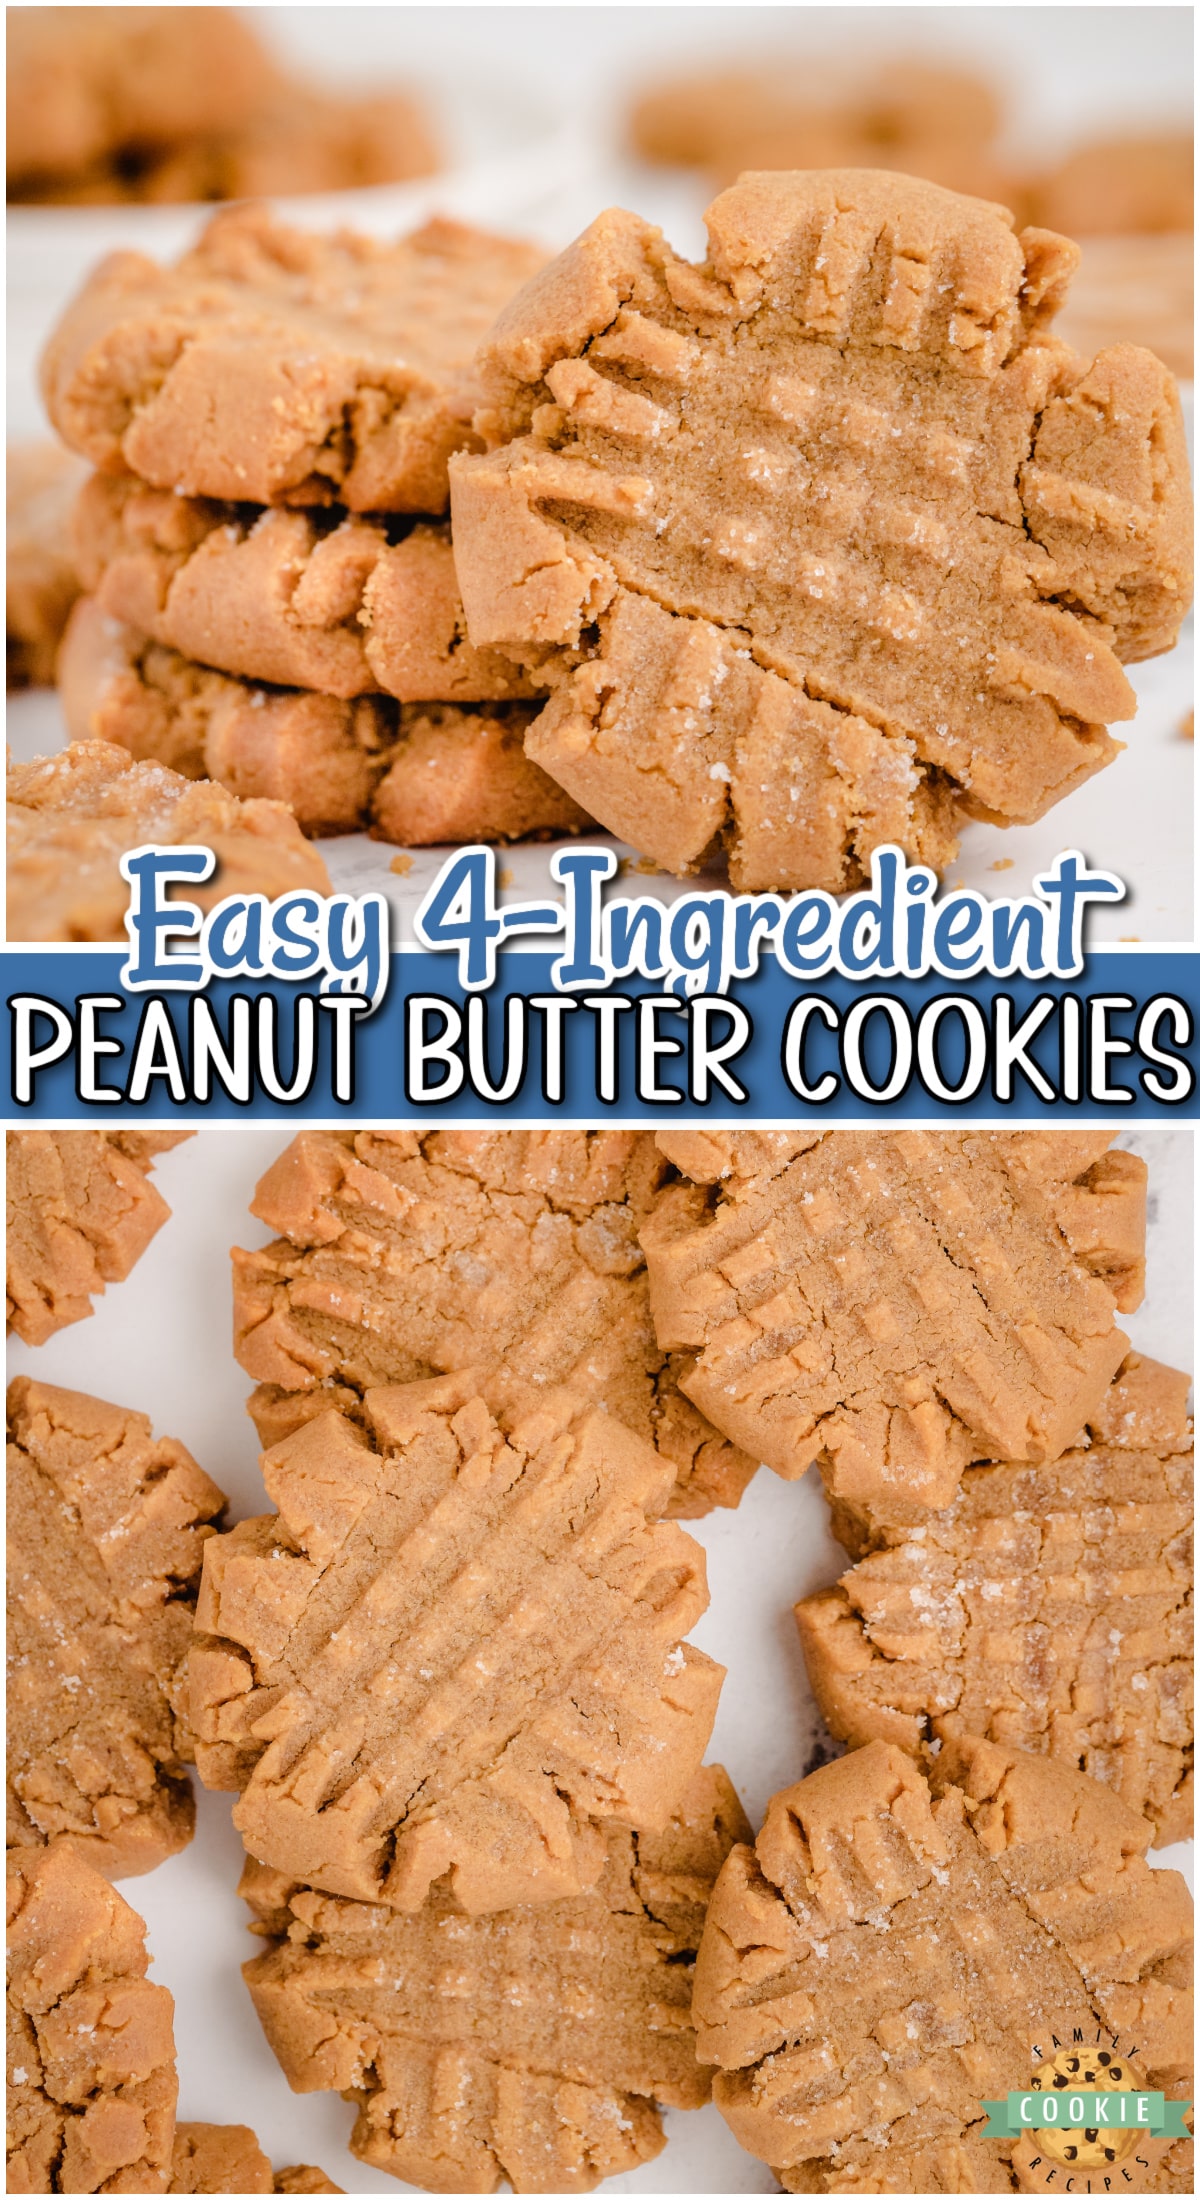 Easy Peanut Butter Cookies made with just a handful of ingredients and no flour! Chewy peanut butter cookie recipe made in minutes & perfect for peanut butter lovers!